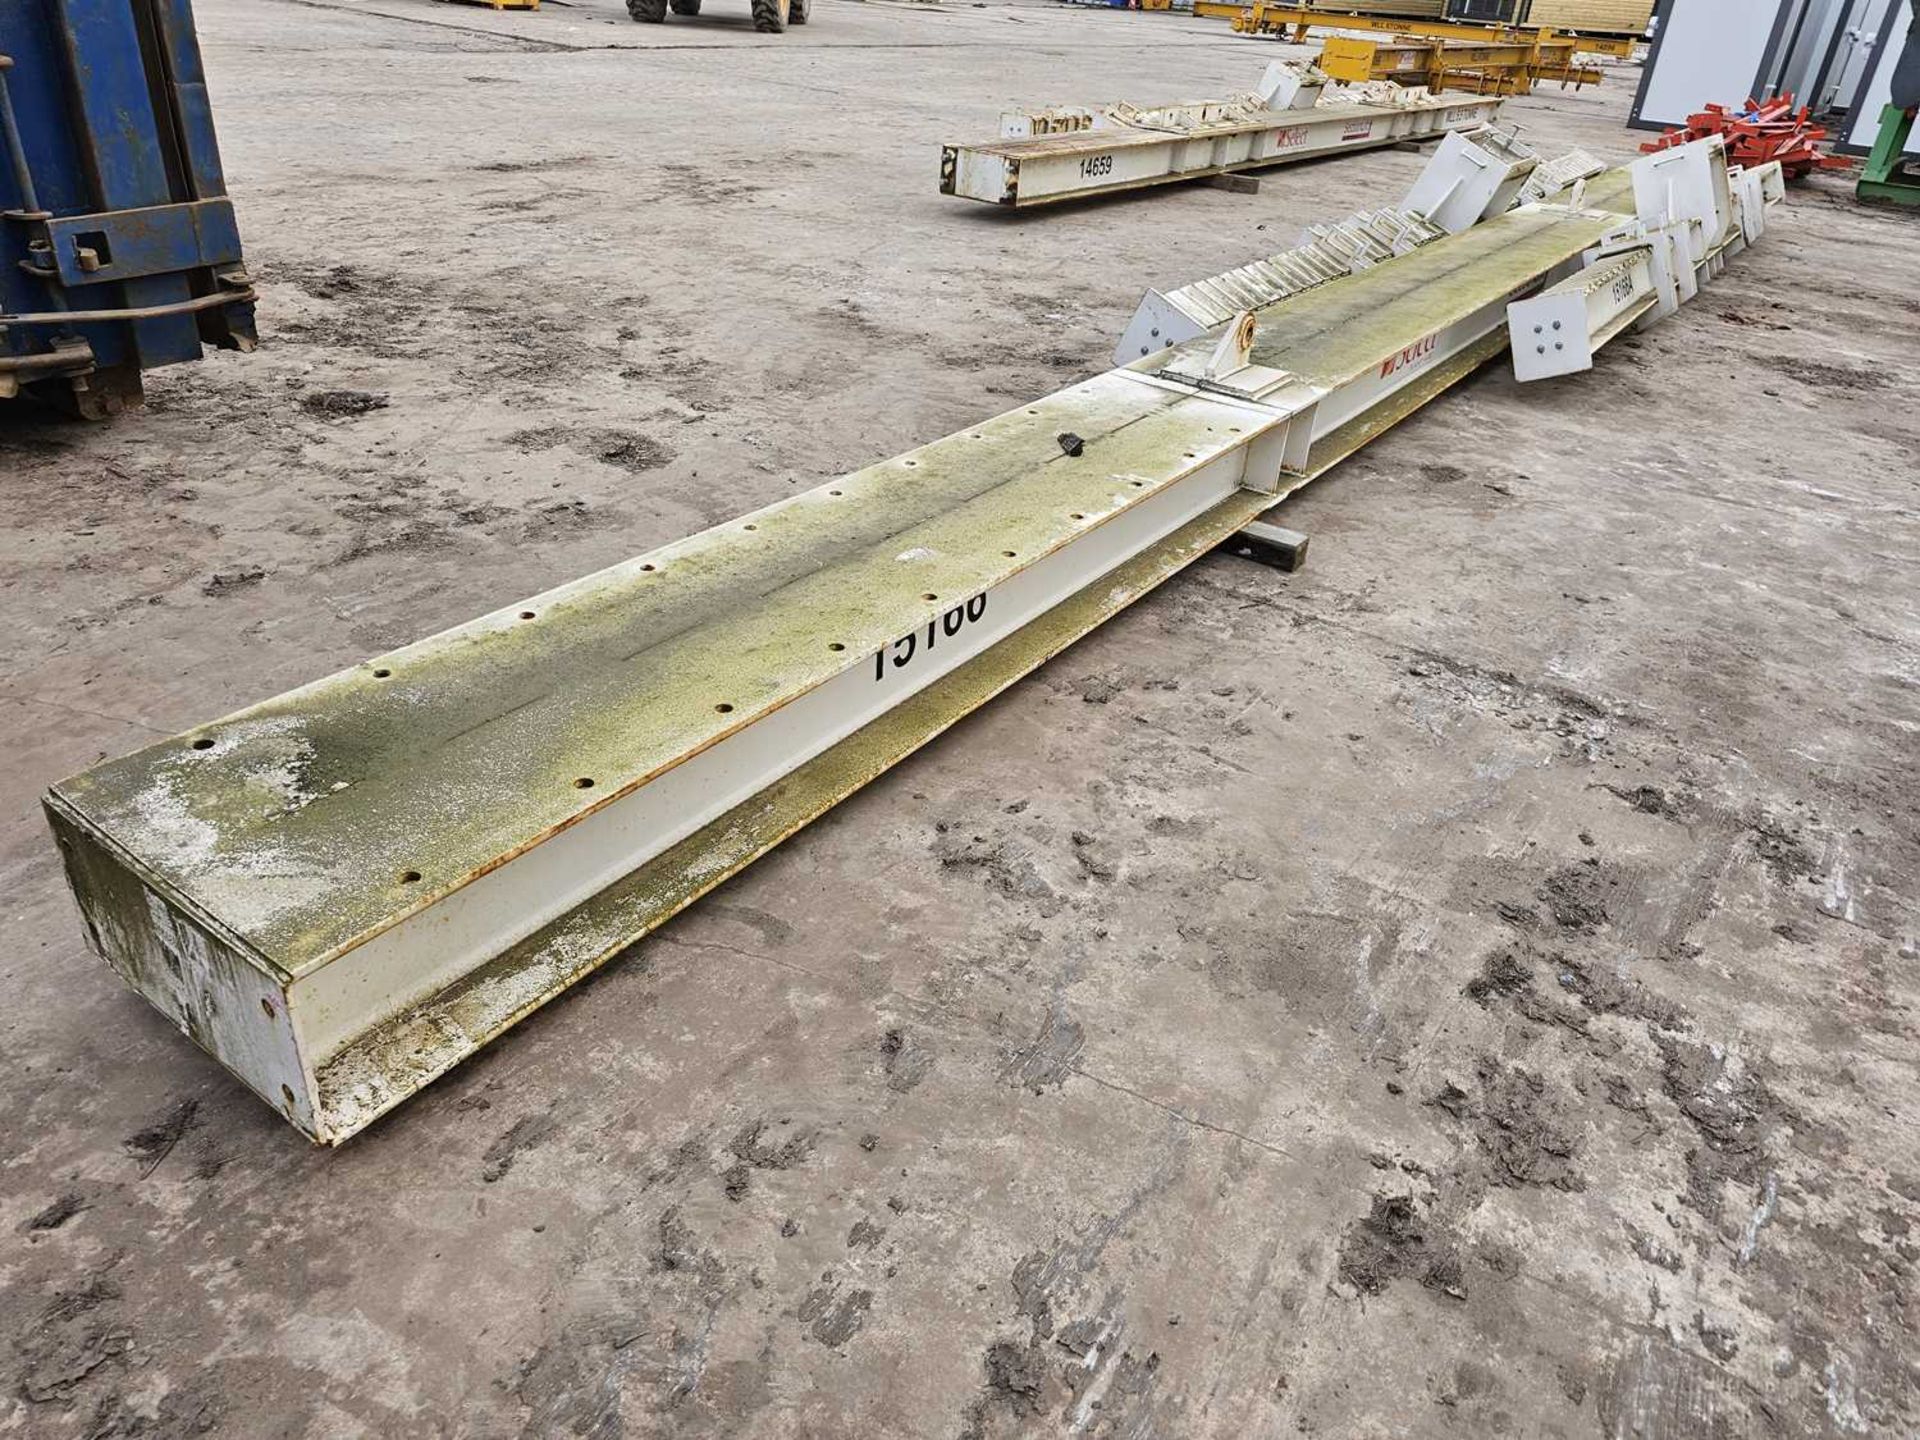 2019 Section Lift 9.7m x 5.8m Adjustable 5.5 Ton Multi Point Spreader Beam - Image 4 of 7